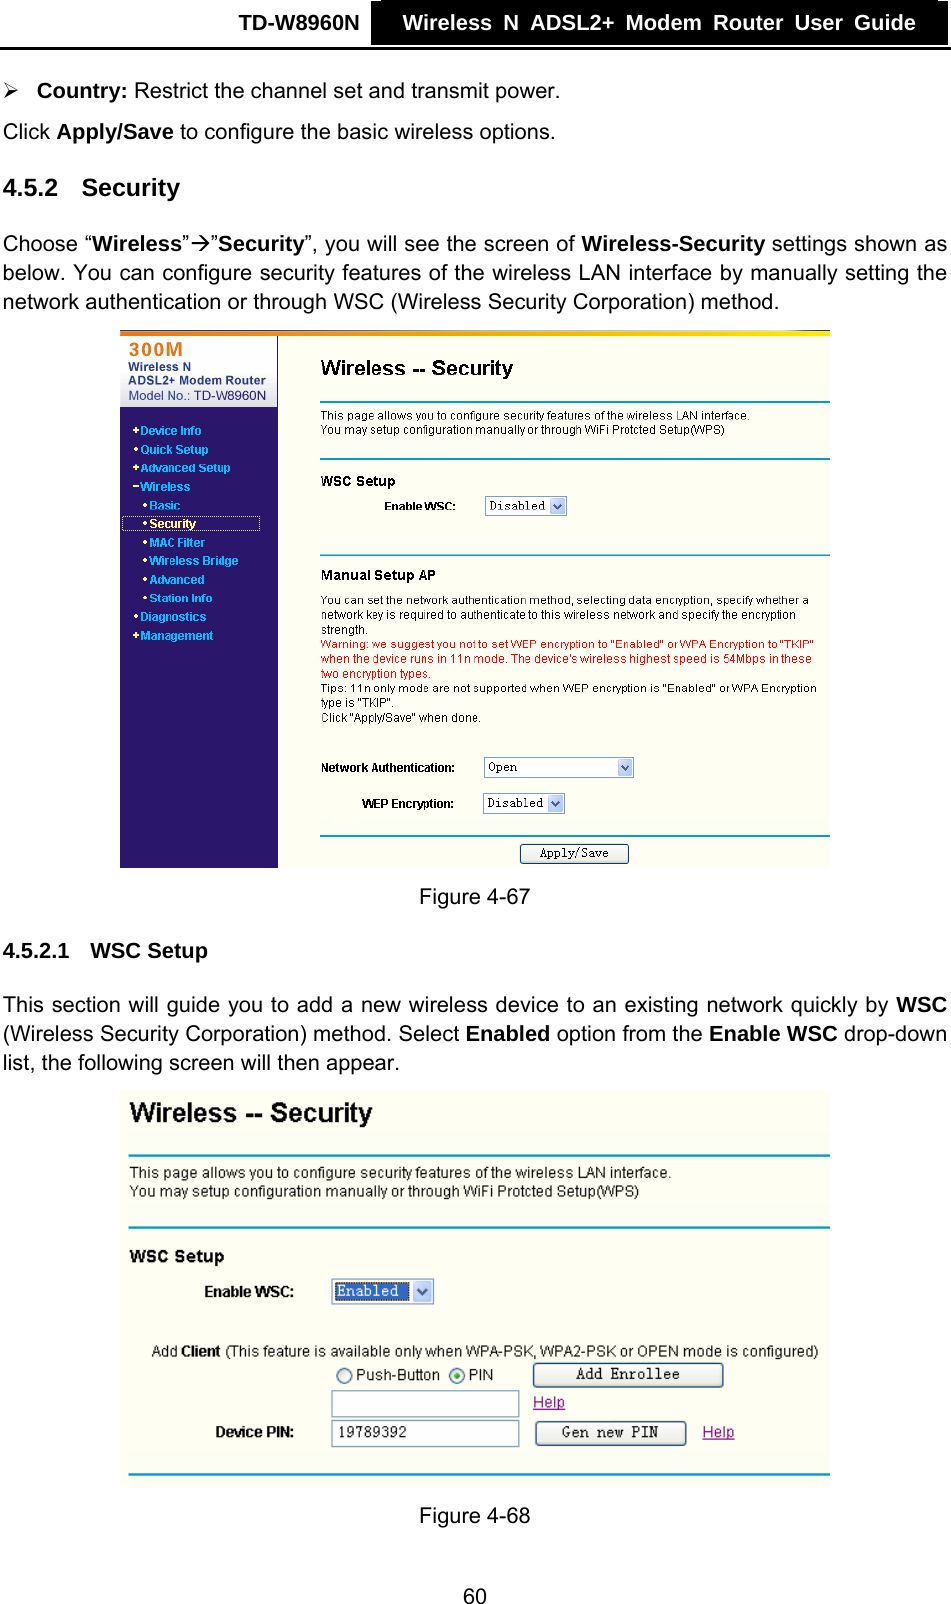 TD-W8960N    Wireless N ADSL2+ Modem Router User Guide    ¾ Country: Restrict the channel set and transmit power.   Click Apply/Save to configure the basic wireless options. 4.5.2  Security Choose “Wireless”Æ”Security”, you will see the screen of Wireless-Security settings shown as below. You can configure security features of the wireless LAN interface by manually setting the network authentication or through WSC (Wireless Security Corporation) method.  Figure 4-67 4.5.2.1  WSC Setup This section will guide you to add a new wireless device to an existing network quickly by WSC (Wireless Security Corporation) method. Select Enabled option from the Enable WSC drop-down list, the following screen will then appear.  Figure 4-68 60 